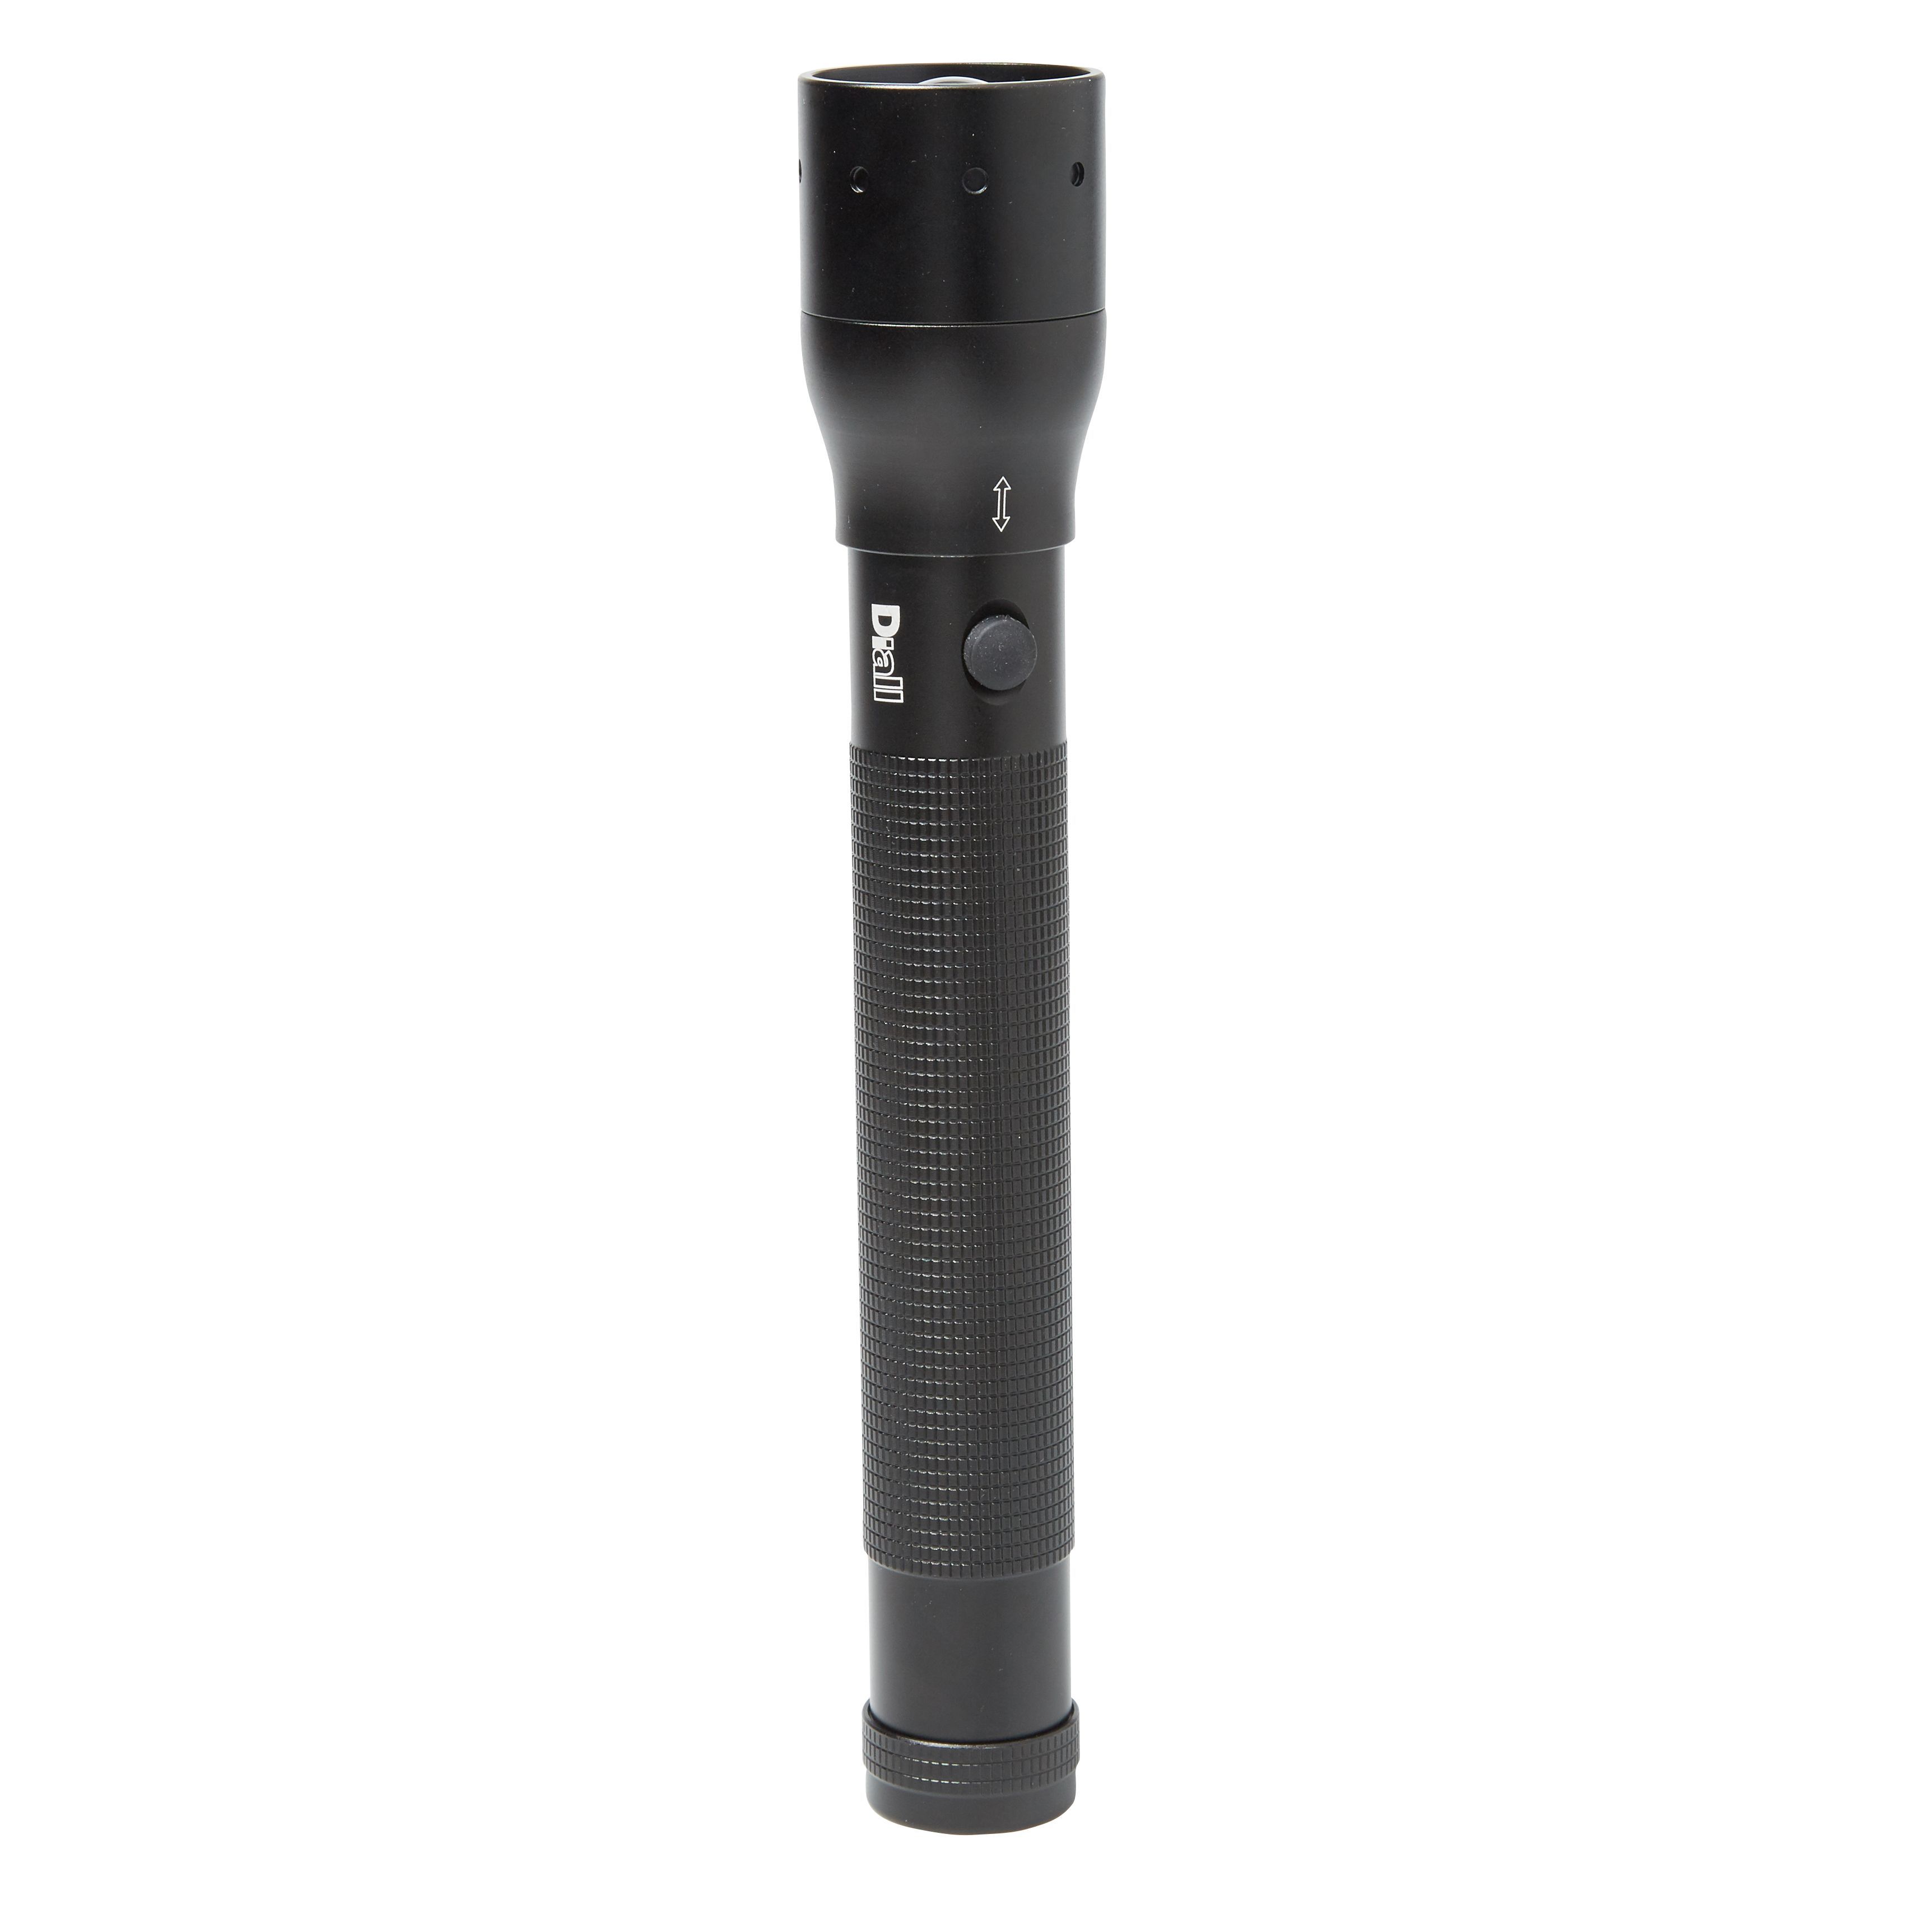 Diall Pro Black 180lm LED Torch